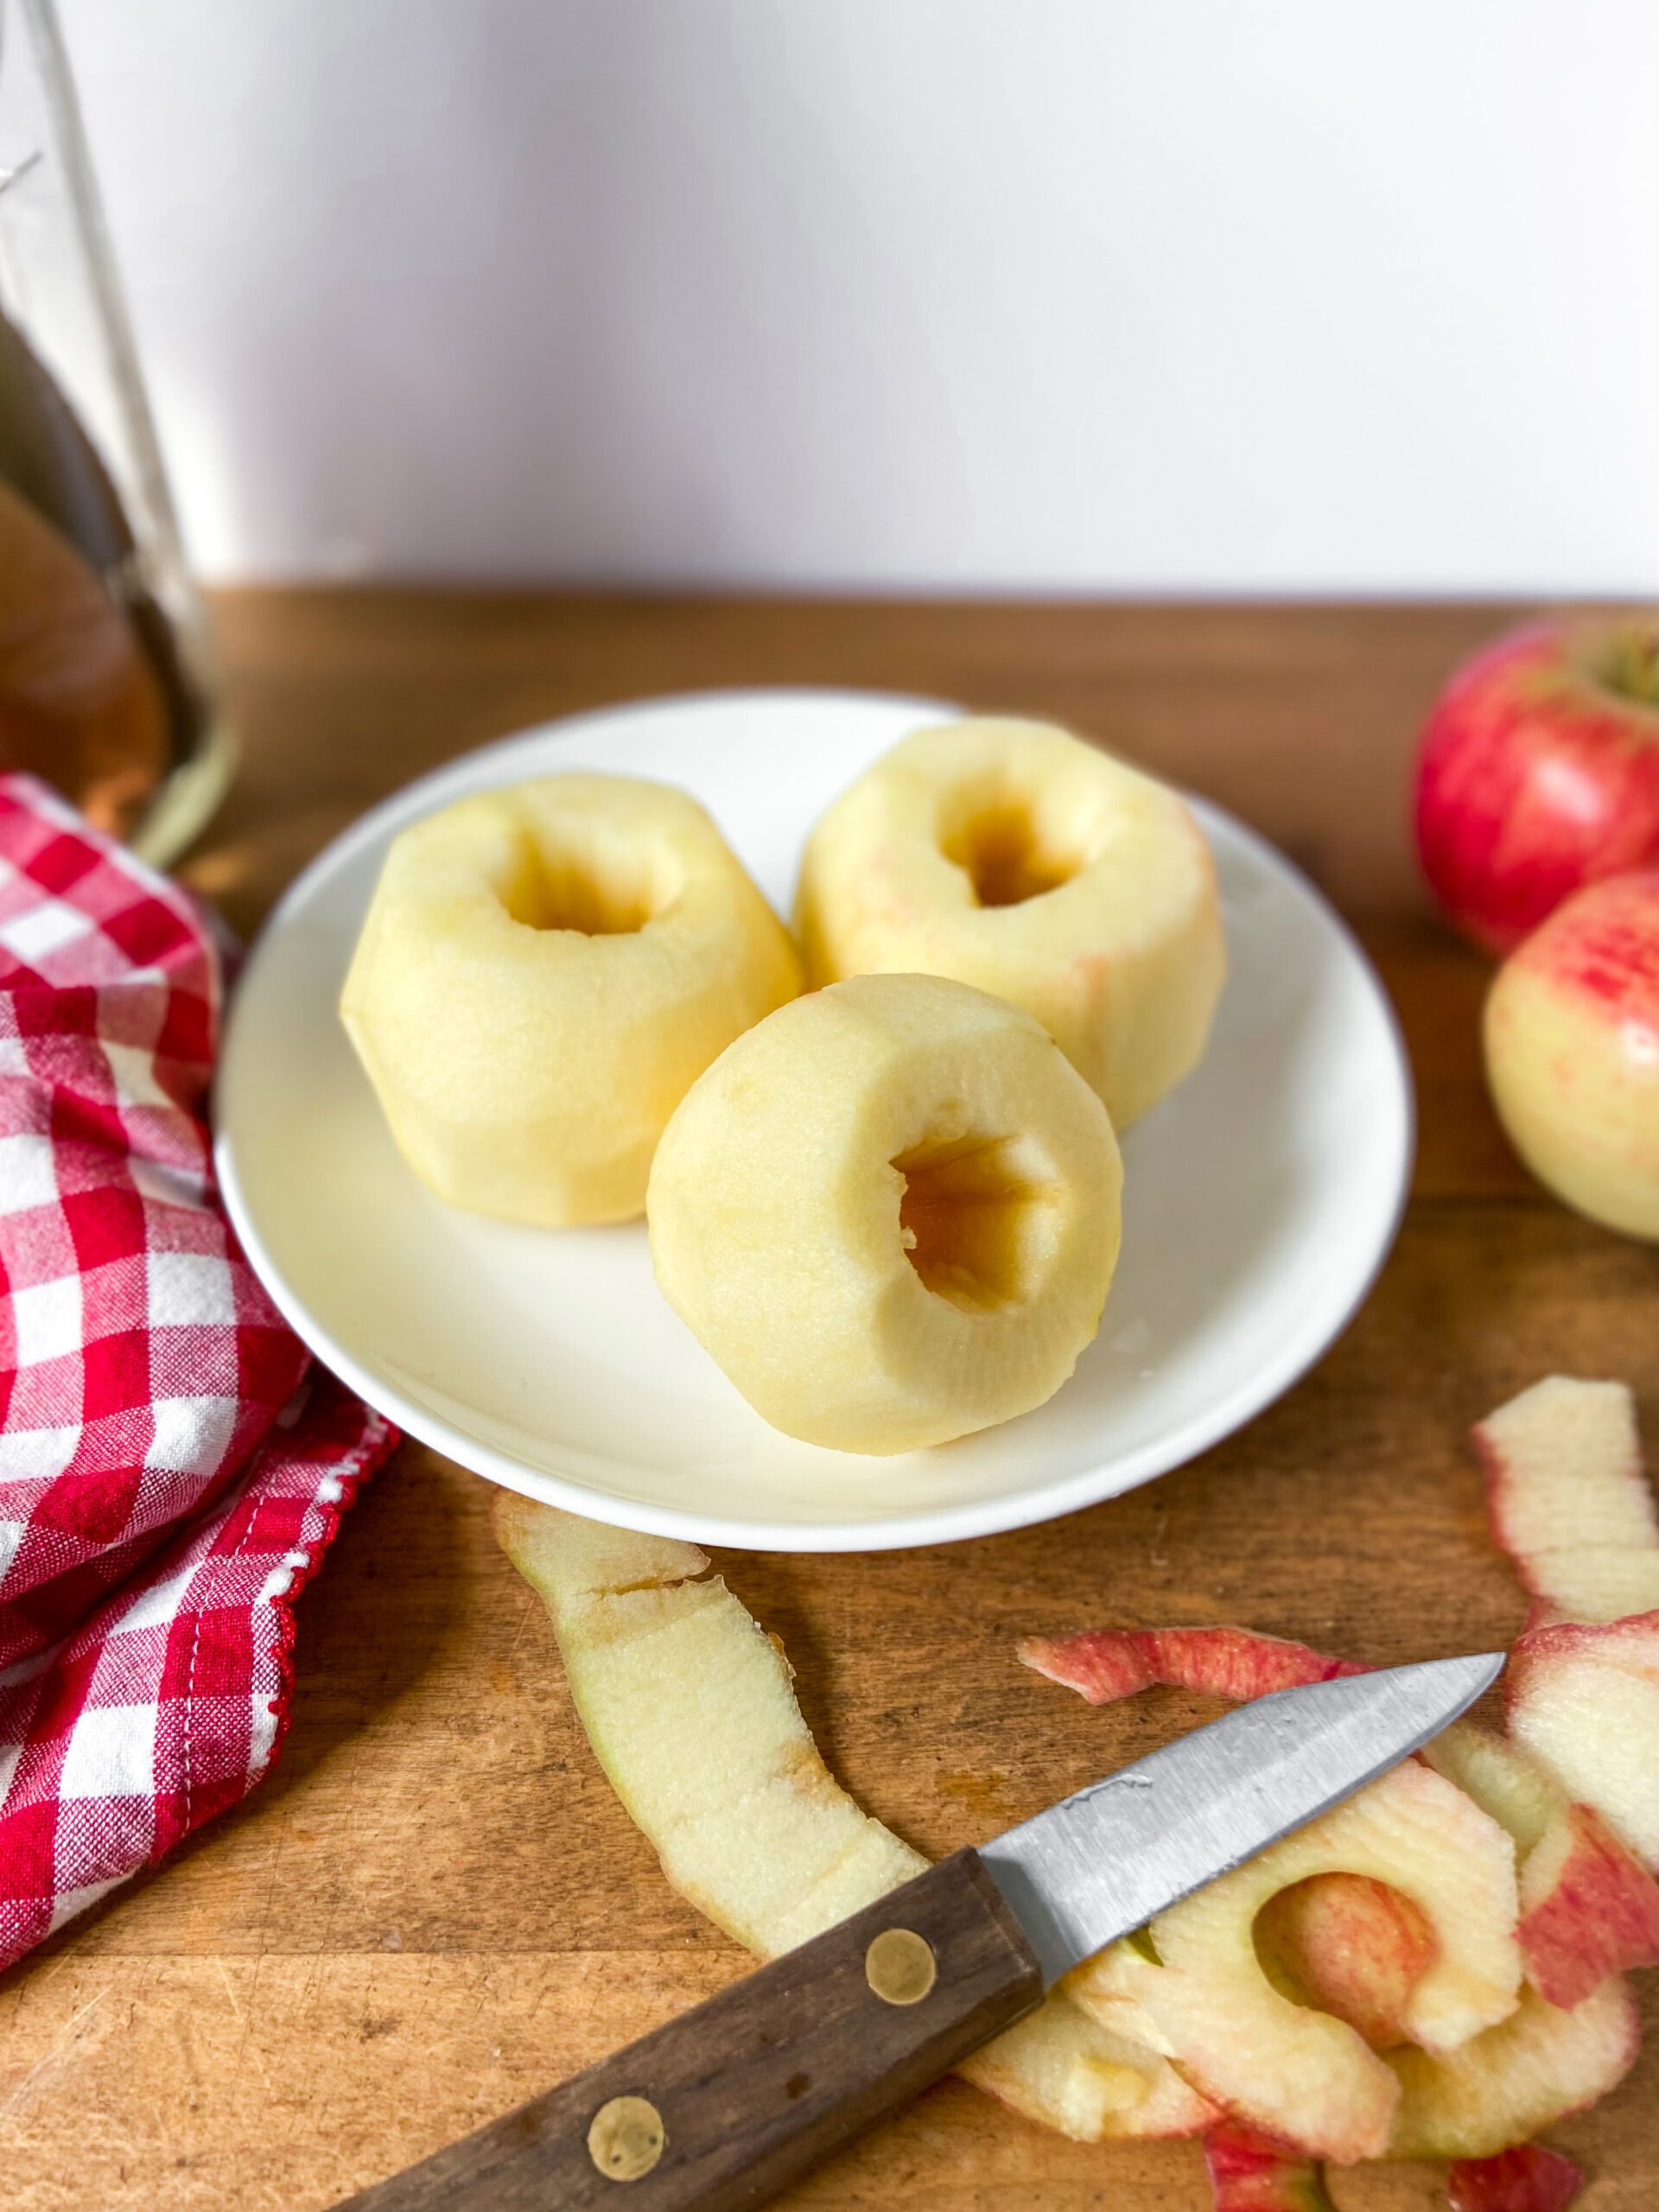 How To Freeze Apples - This Farm Girl Cooks